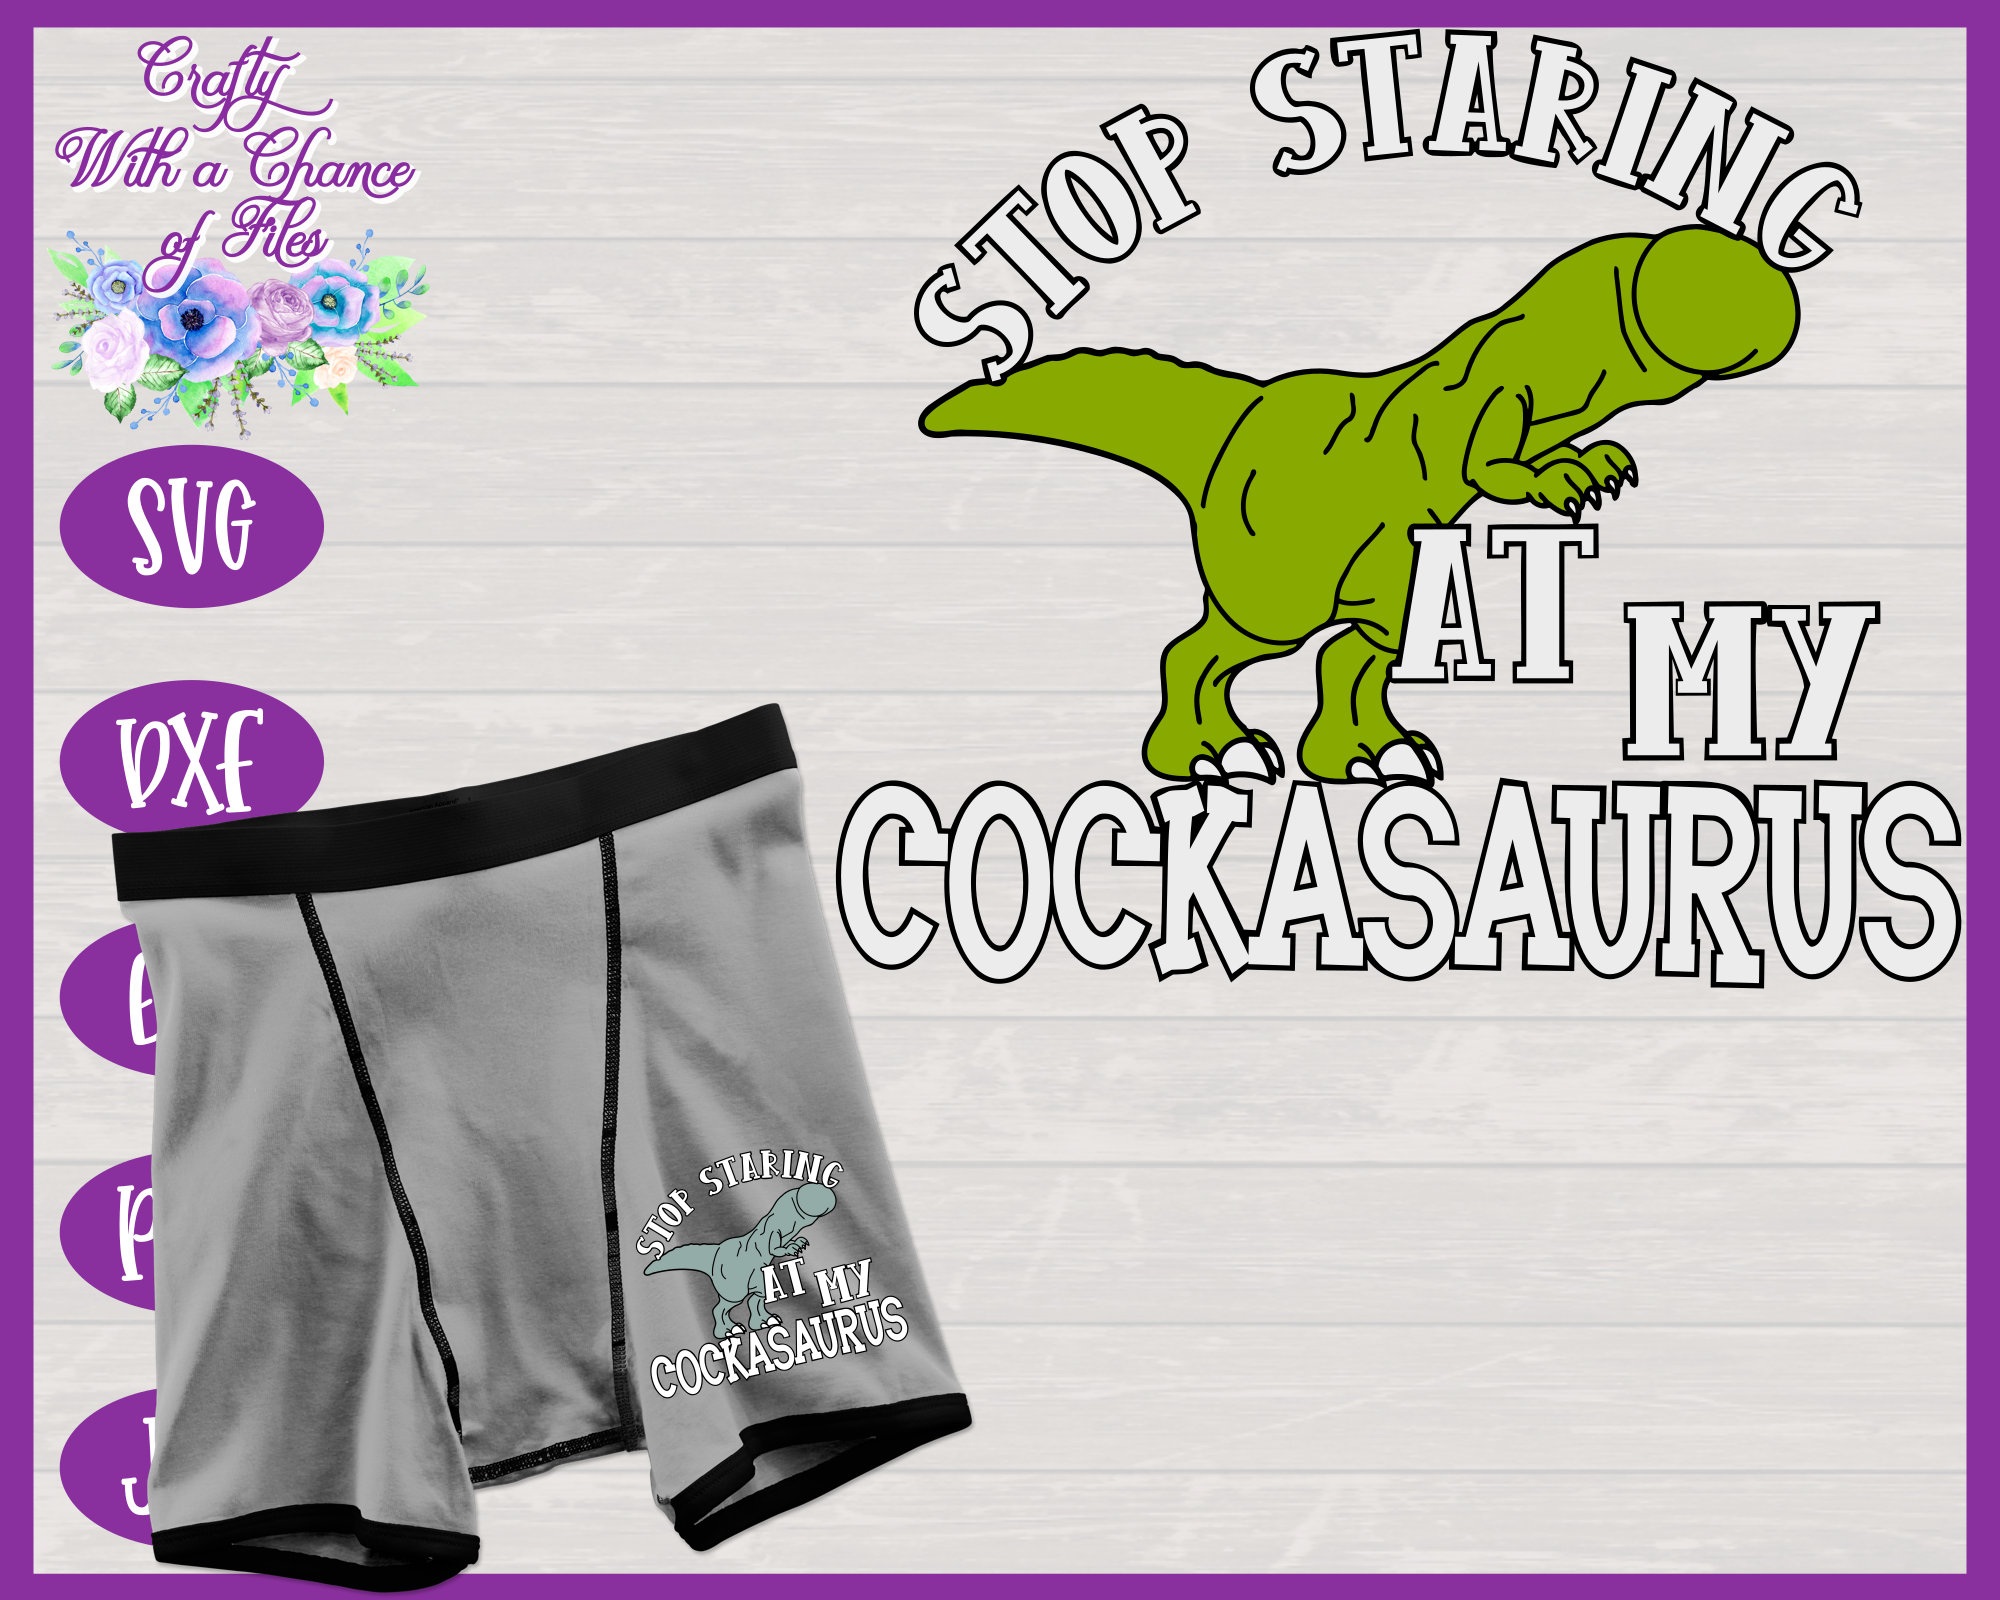 Men's Boxers SVG, Funny Men's Underwear SVG, Stop Staring at My